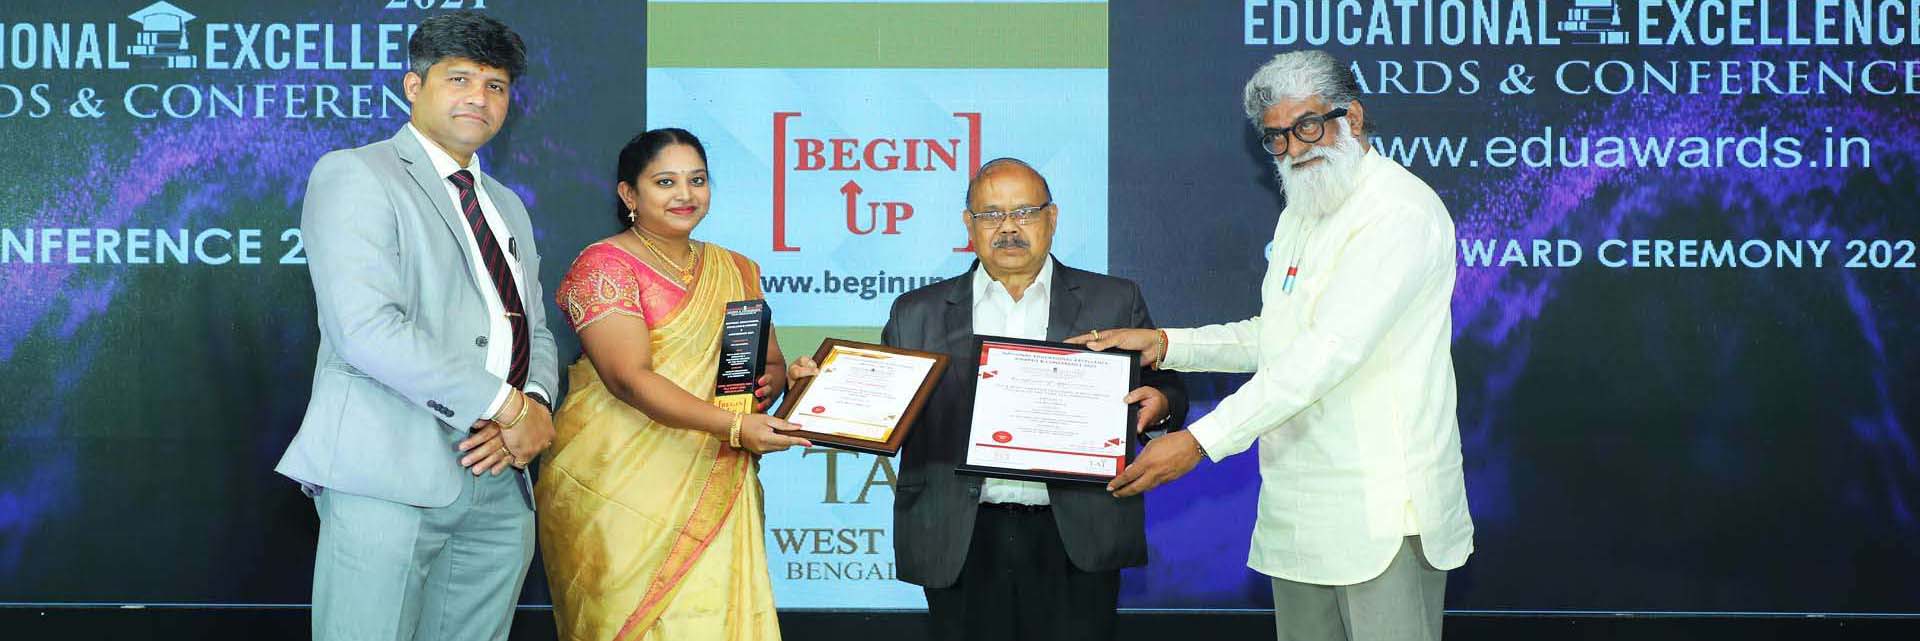 national educational excellence award 2021